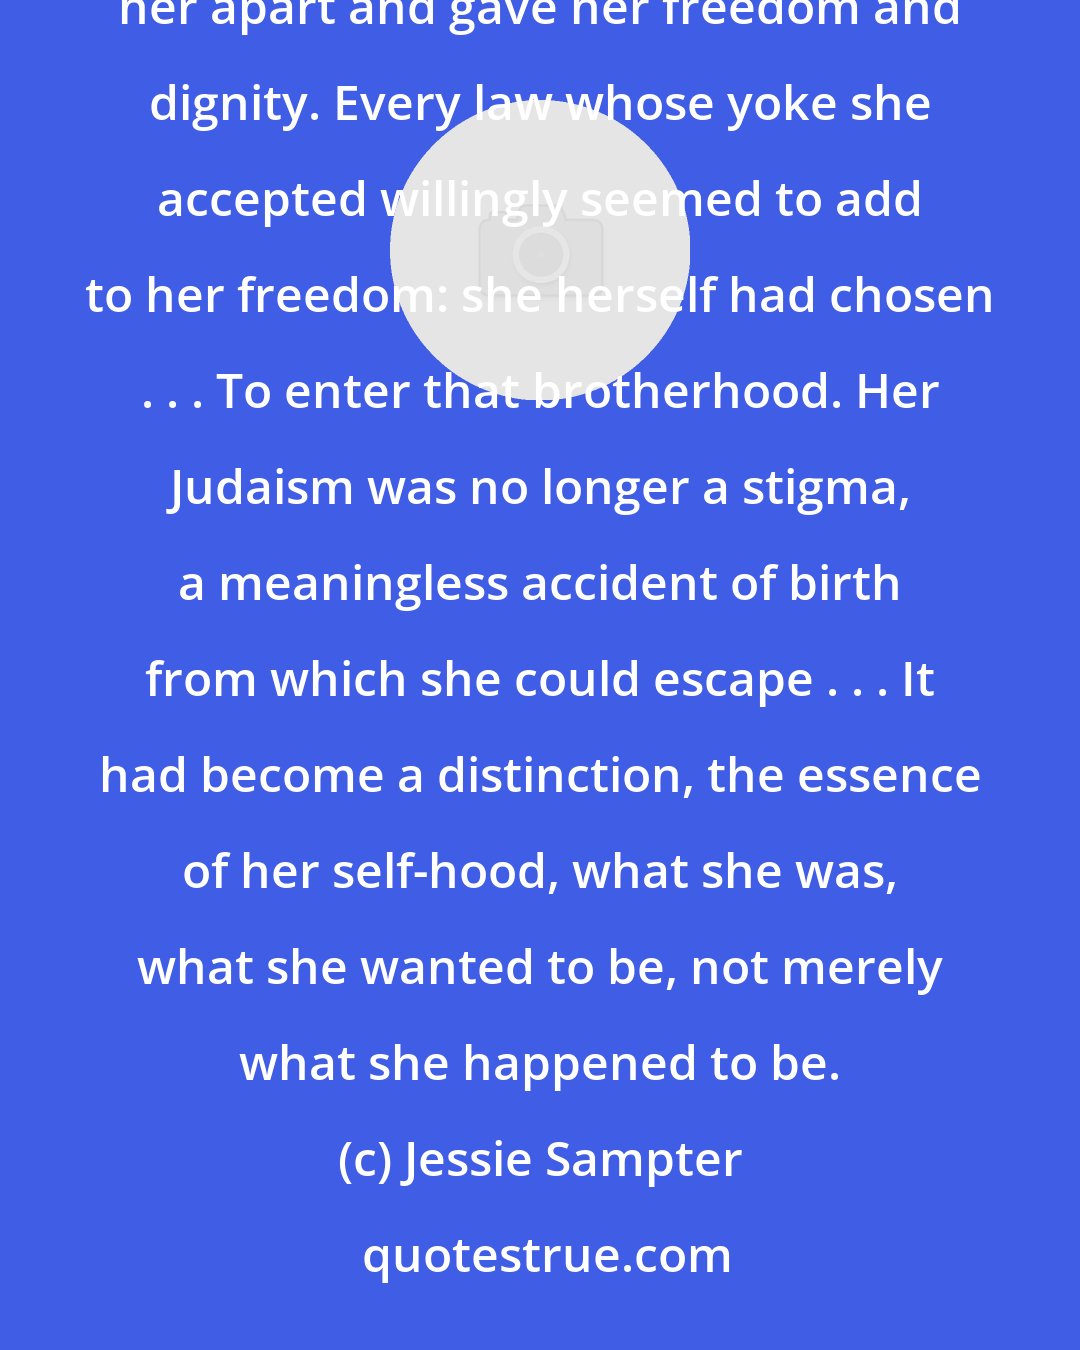 Jessie Sampter: [Keeping kosher was] the symbol of an initiation, like the insignia of a secret brotherhood, that set her apart and gave her freedom and dignity. Every law whose yoke she accepted willingly seemed to add to her freedom: she herself had chosen . . . To enter that brotherhood. Her Judaism was no longer a stigma, a meaningless accident of birth from which she could escape . . . It had become a distinction, the essence of her self-hood, what she was, what she wanted to be, not merely what she happened to be.